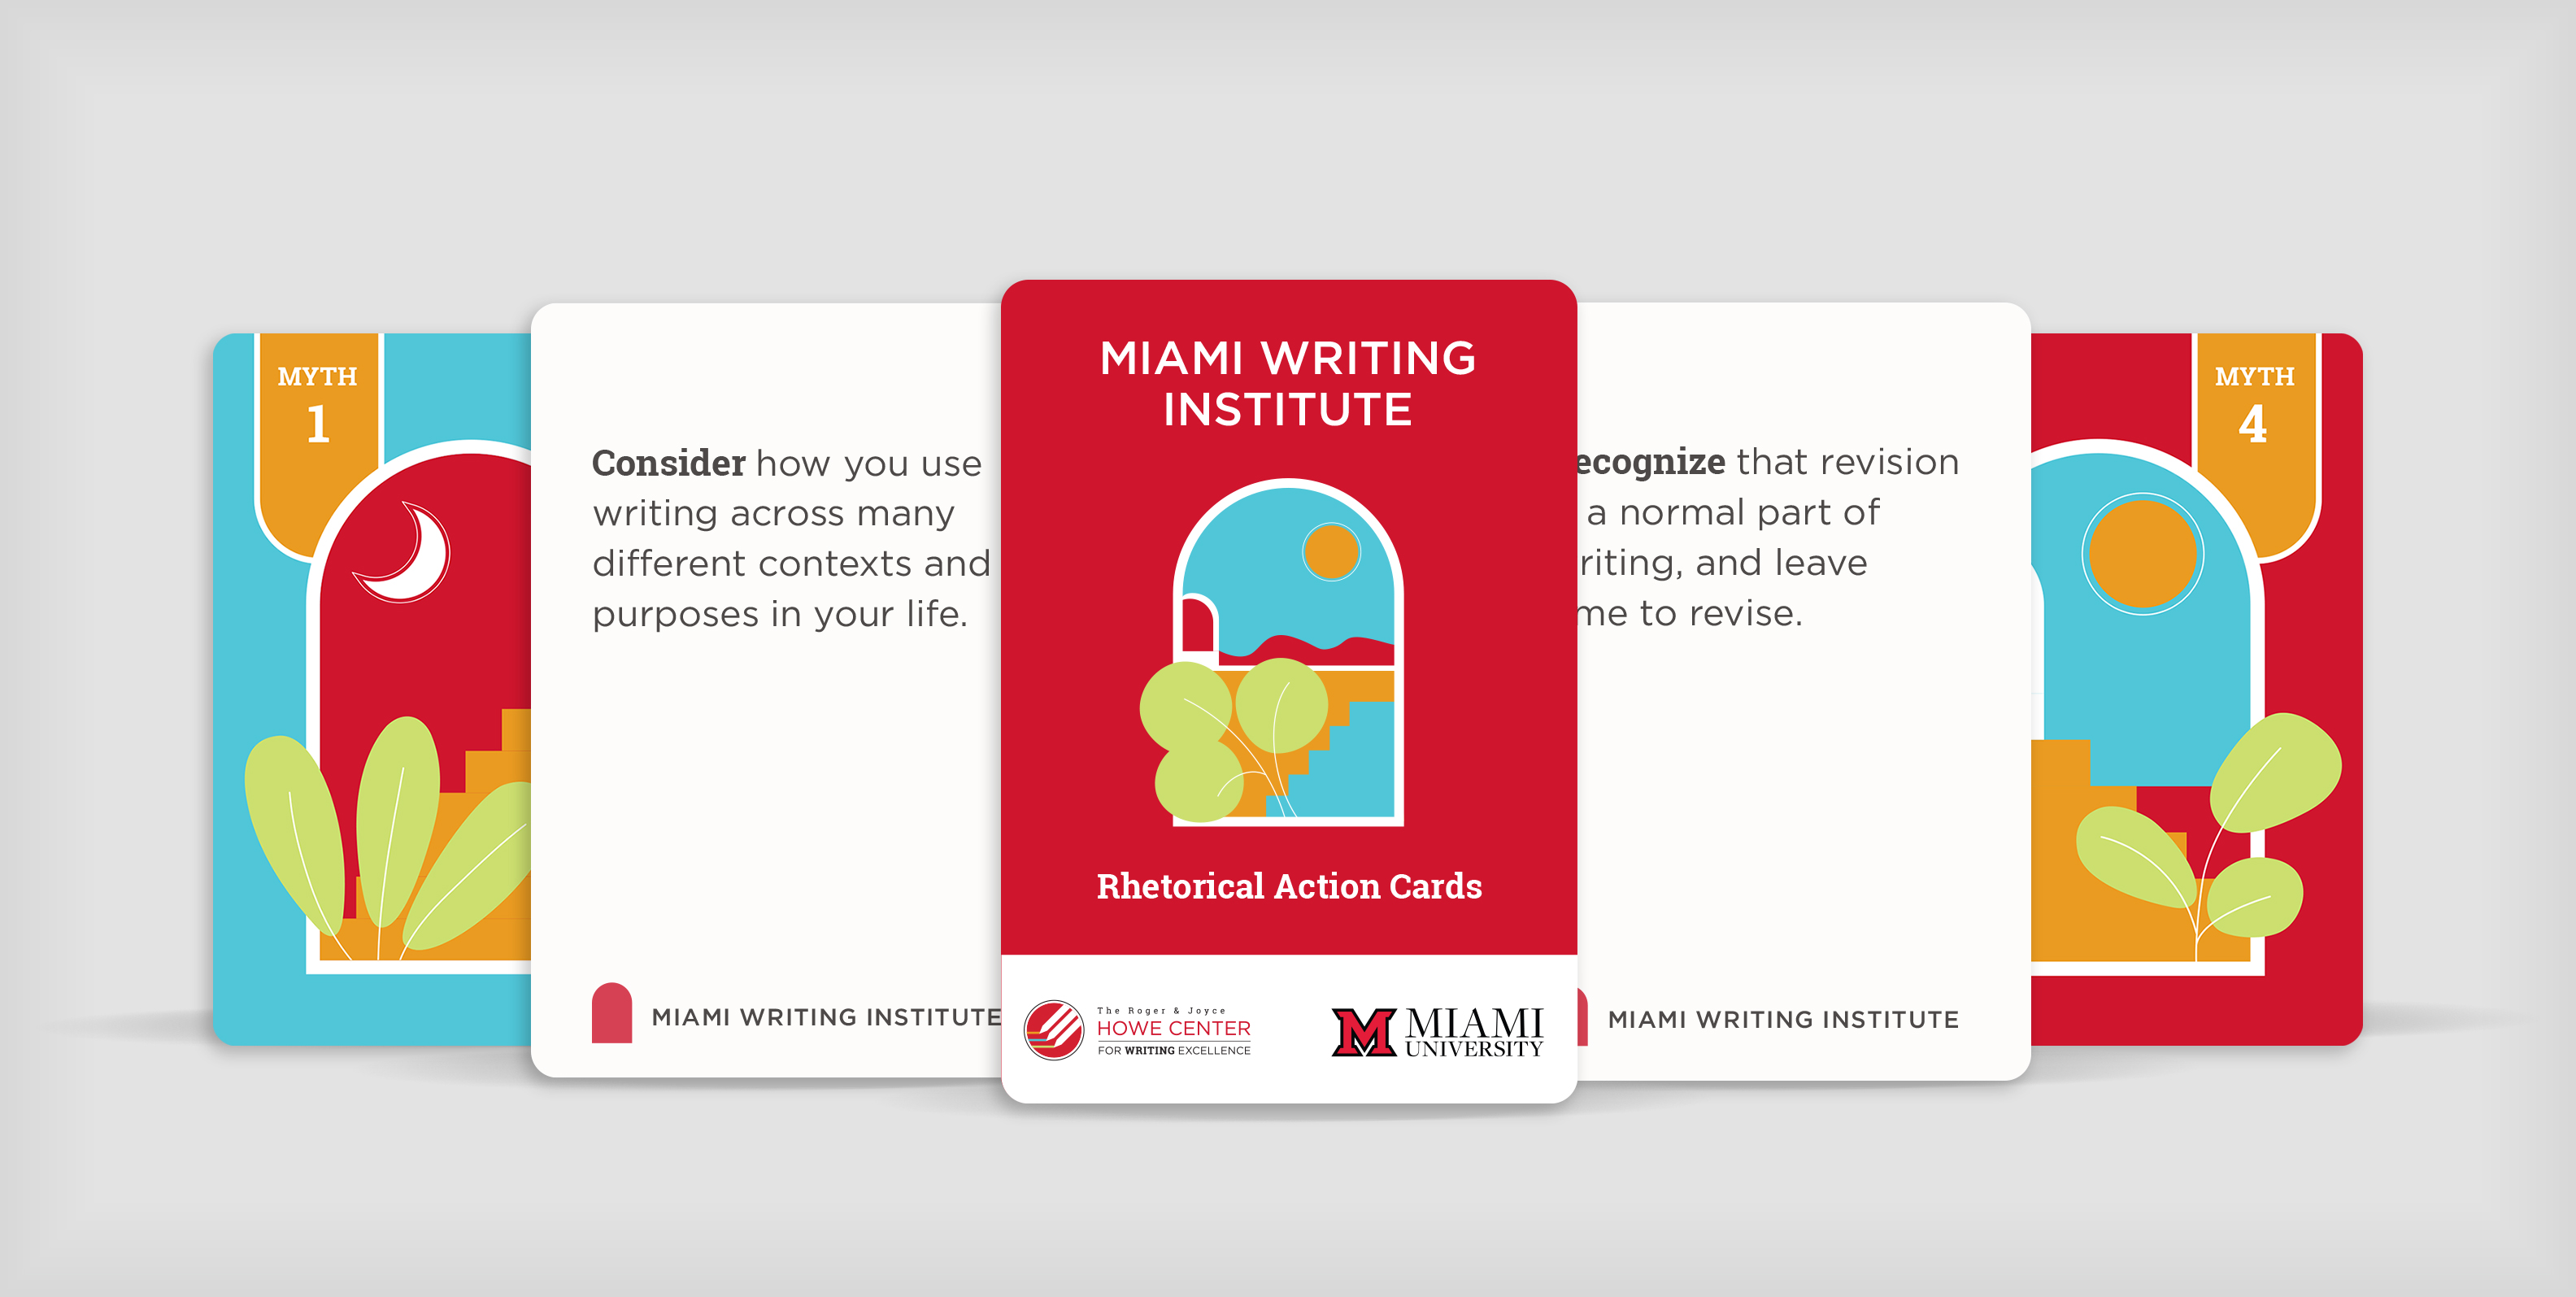 A mockup of a set of flashcards that describe principles from the Miami Writing Institute